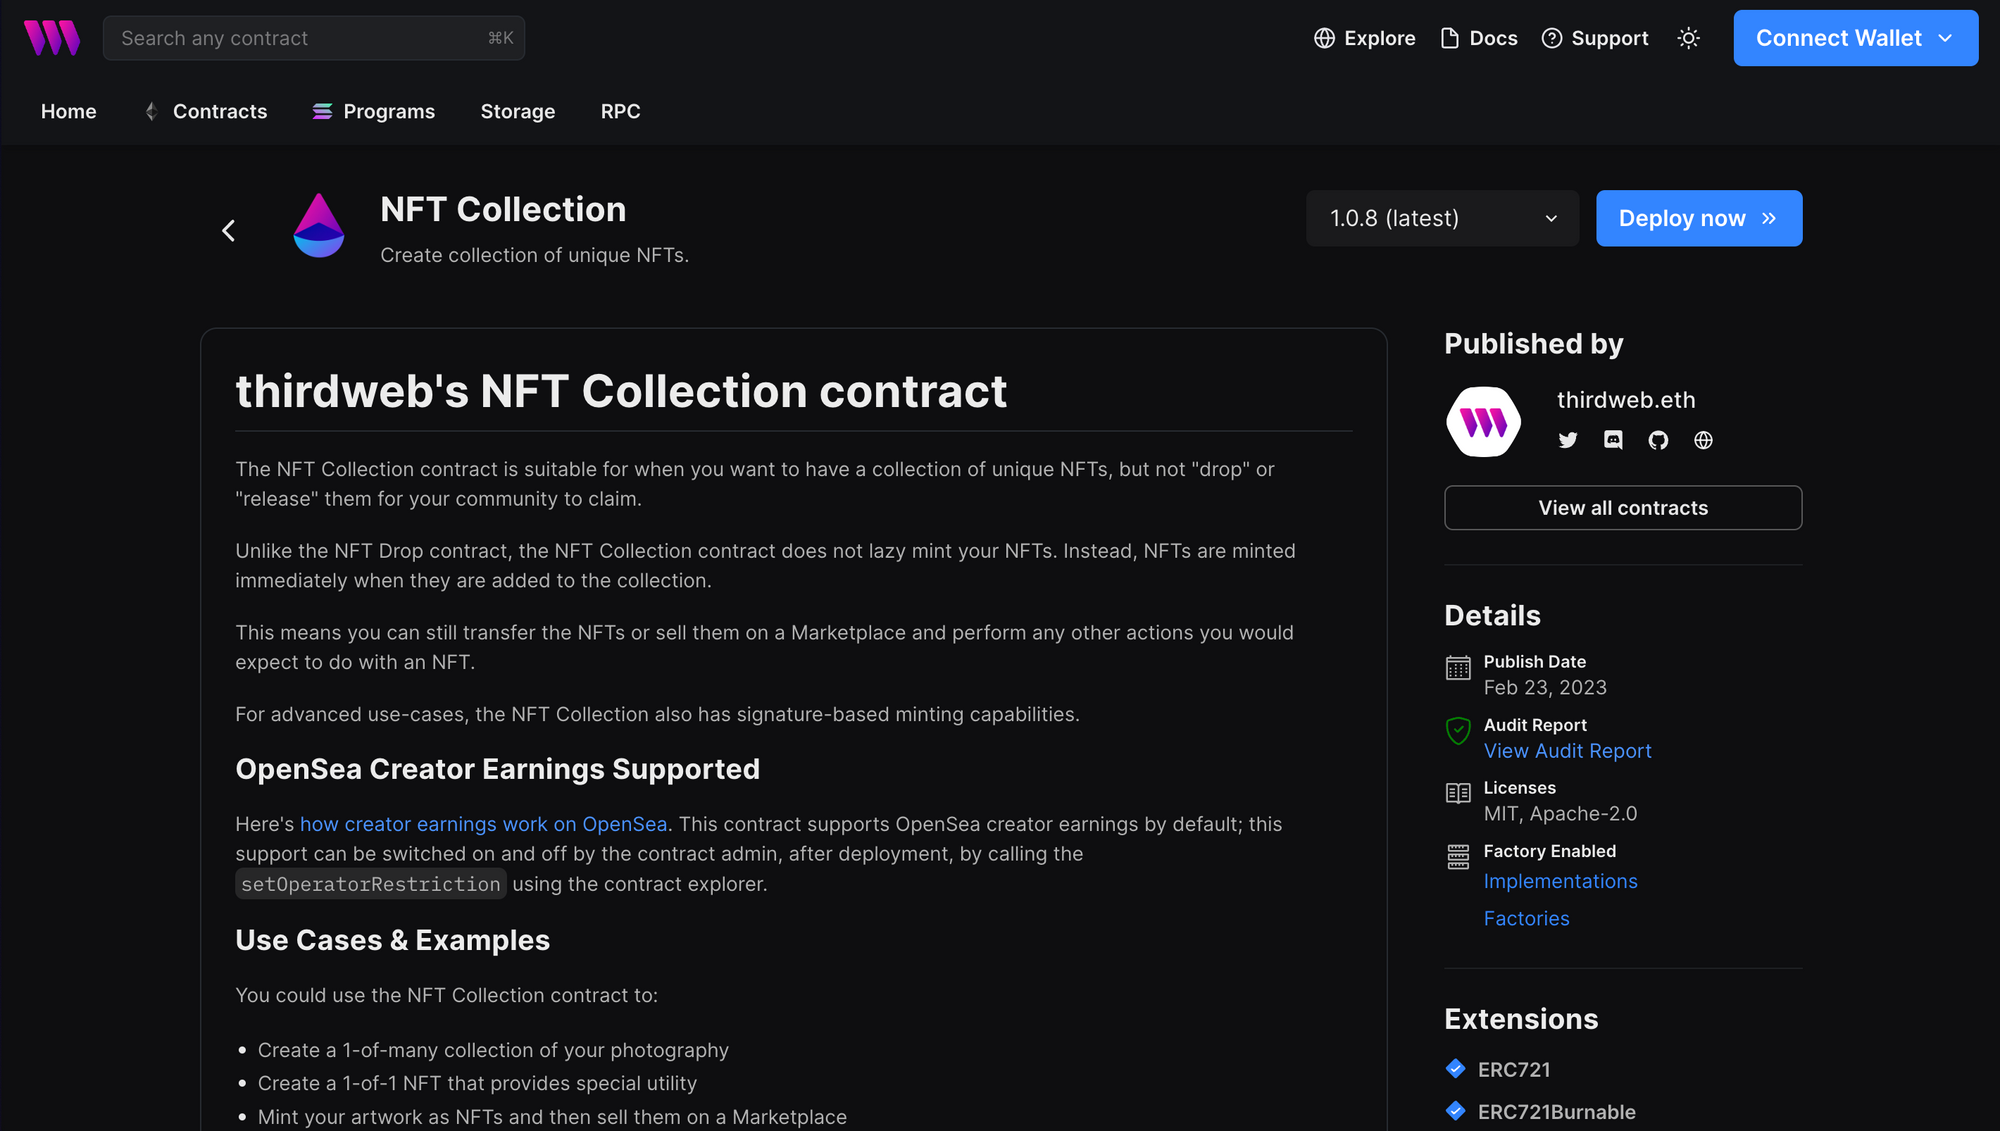 NFT Collection contract page on thirdweb explore